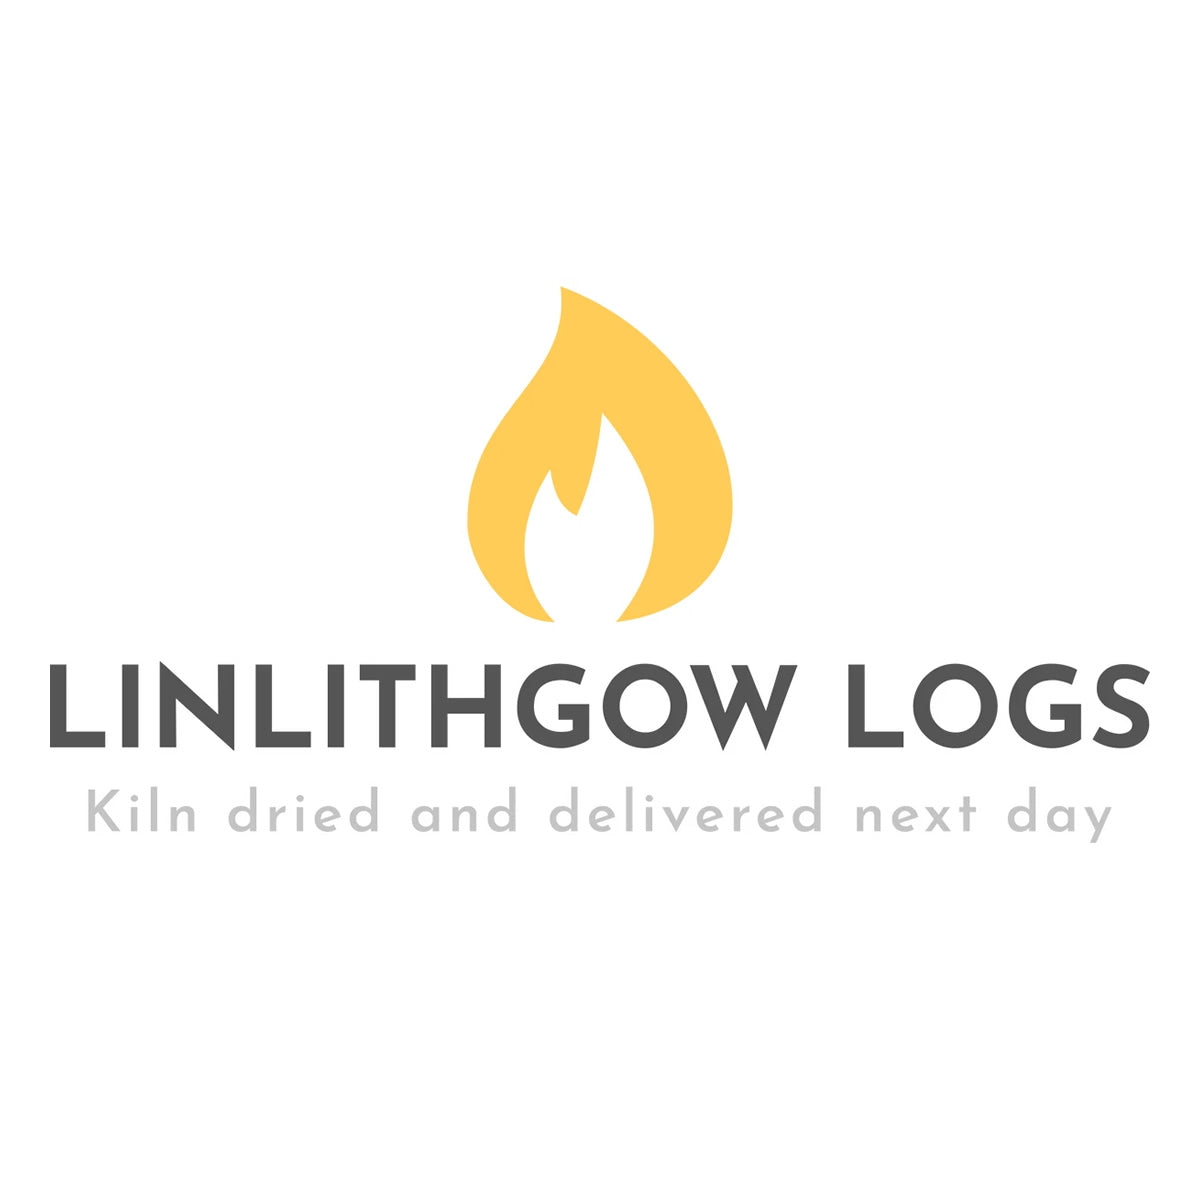 Linlithgow Logs